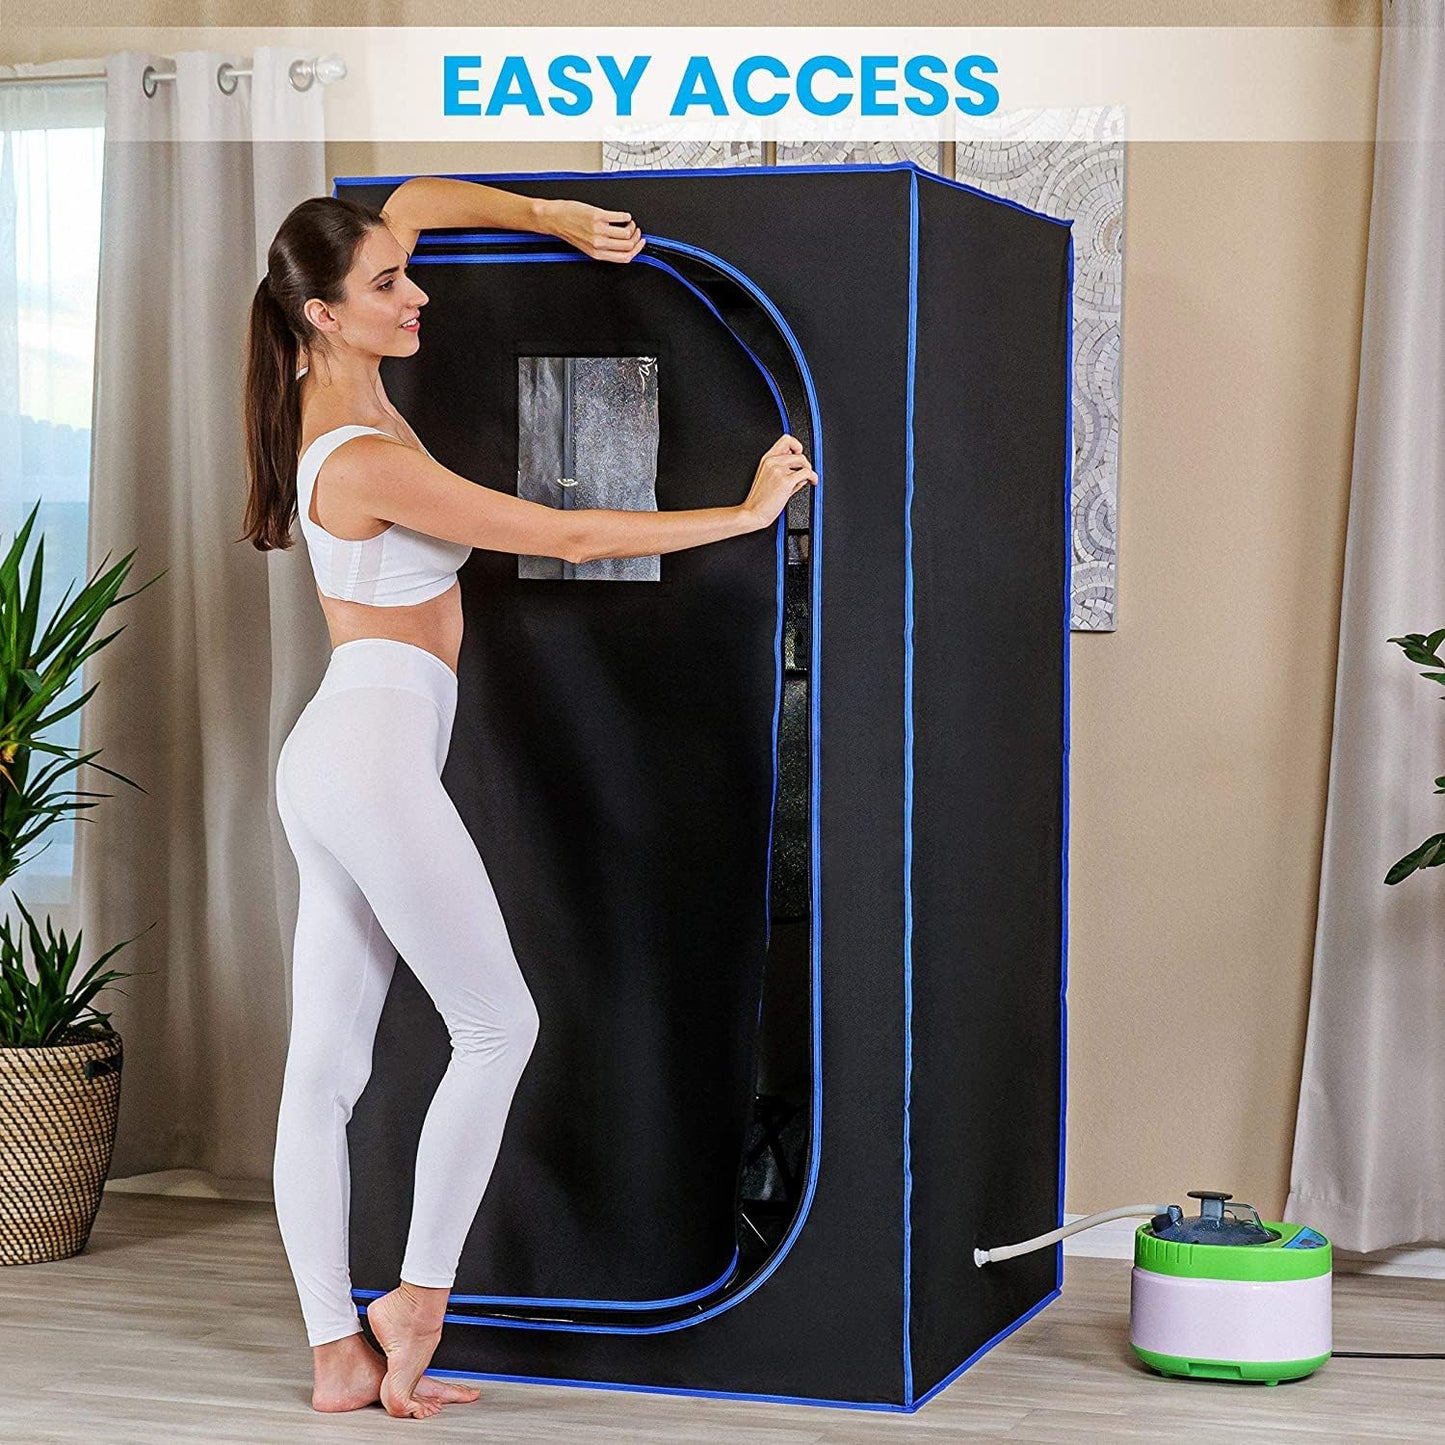 SereneLife Full Size Portable Steam Sauna –Personal Home Spa, with Remote Control, Foldable Chair, Timer